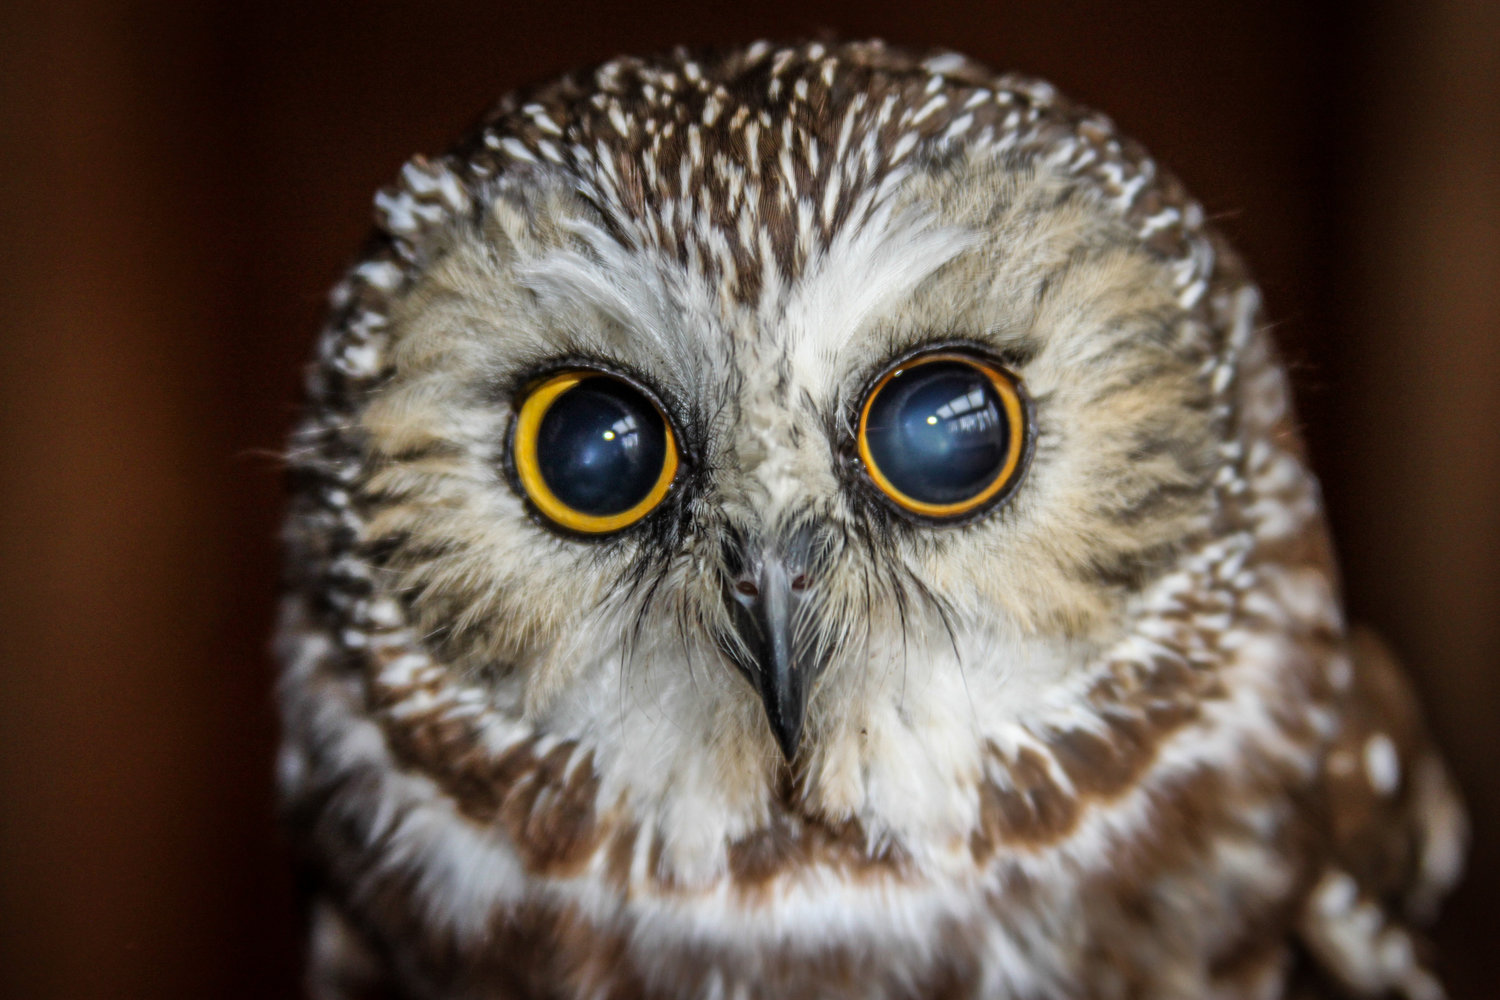 This is a superb owl